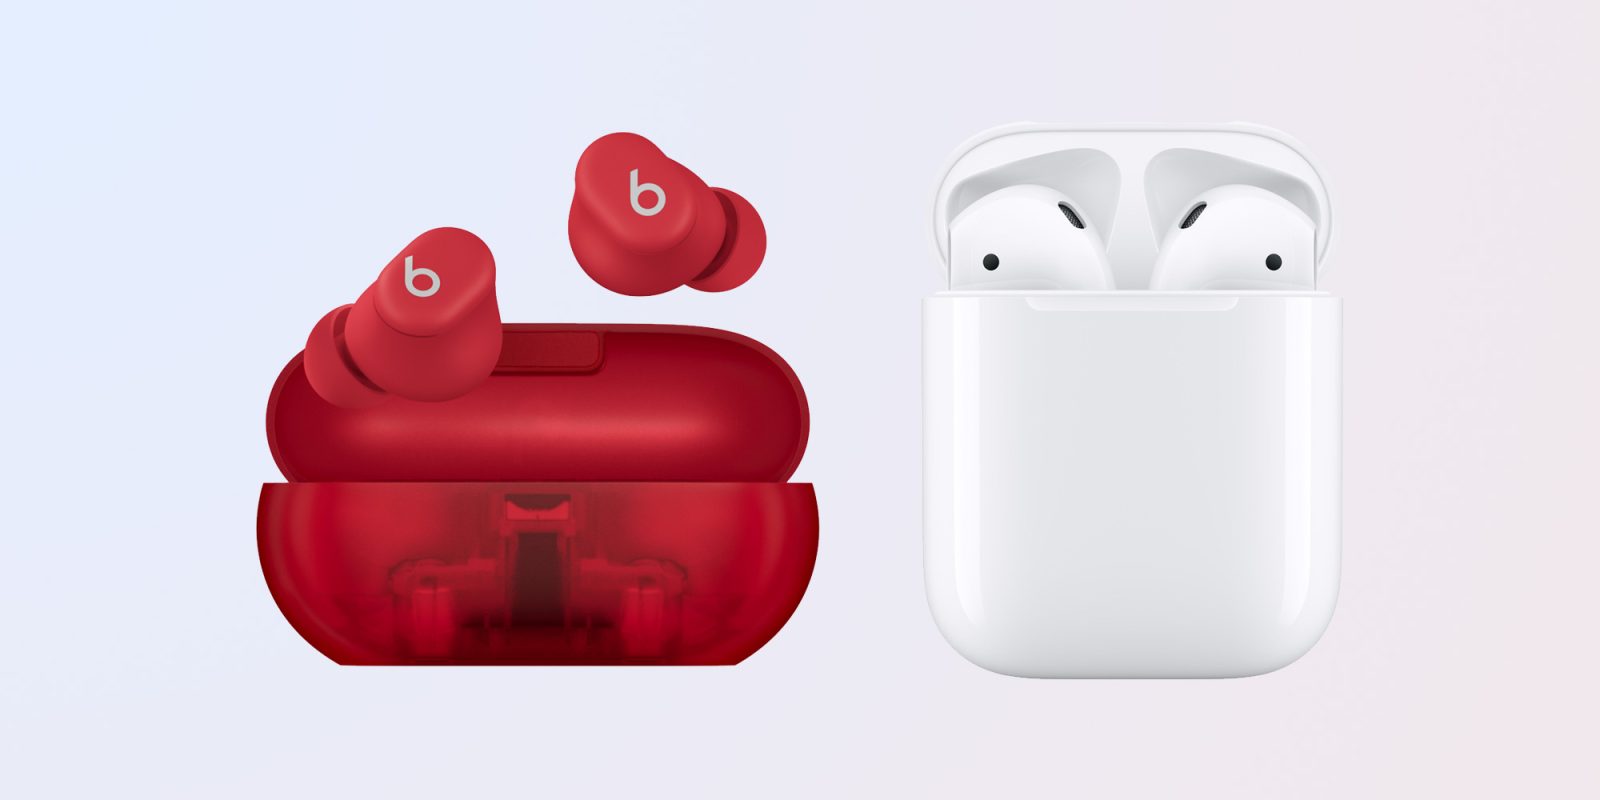 The new Beats Solo Buds already seem like a better deal than the AirPods 2